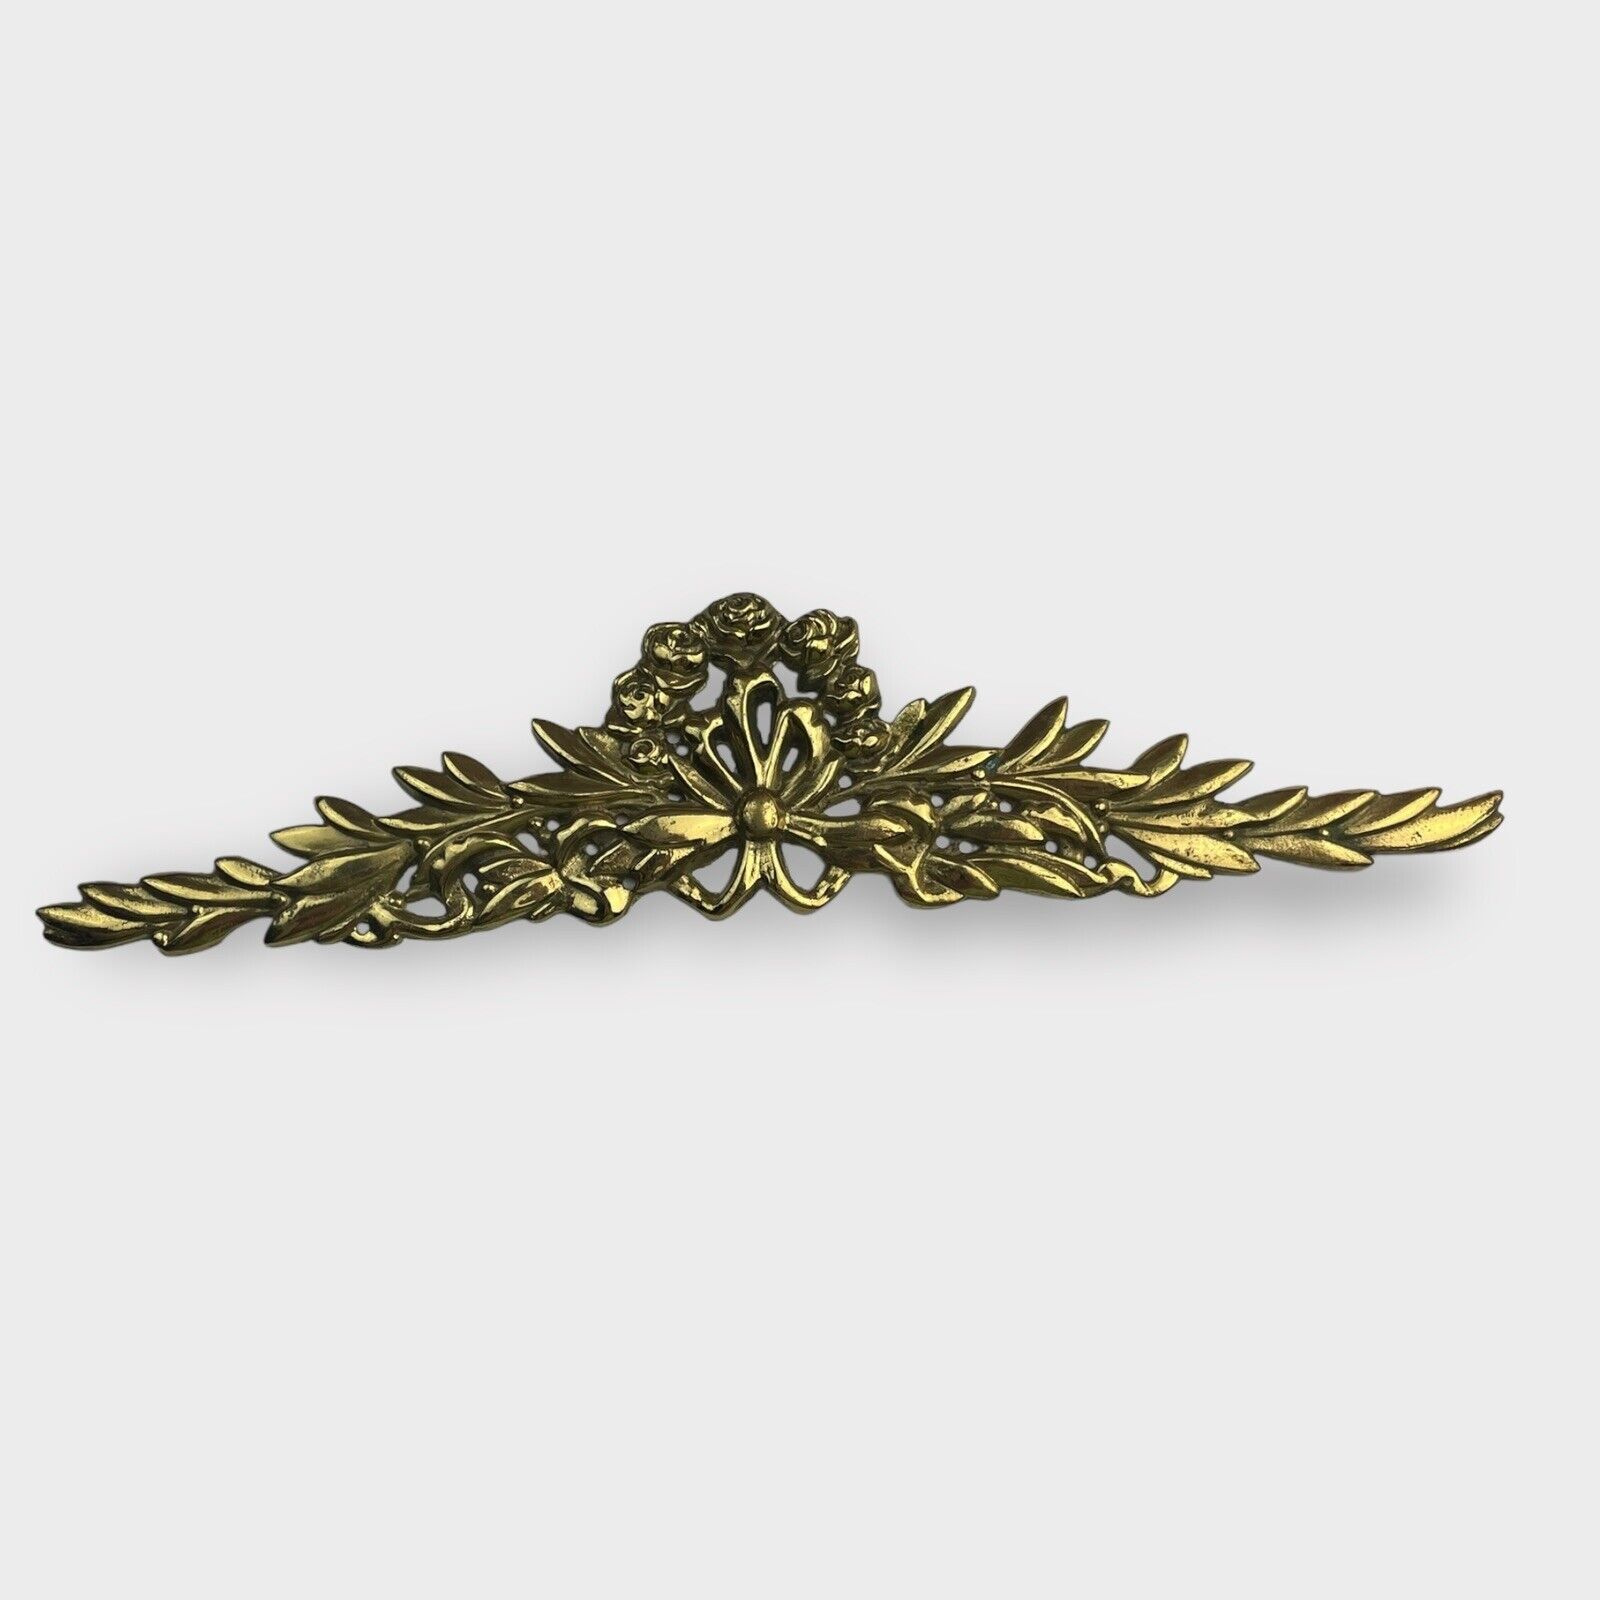 VTG Ornate Brass Wall Hanging Gallery Wall Ribbon Bow Floral Leaves Regency Gold